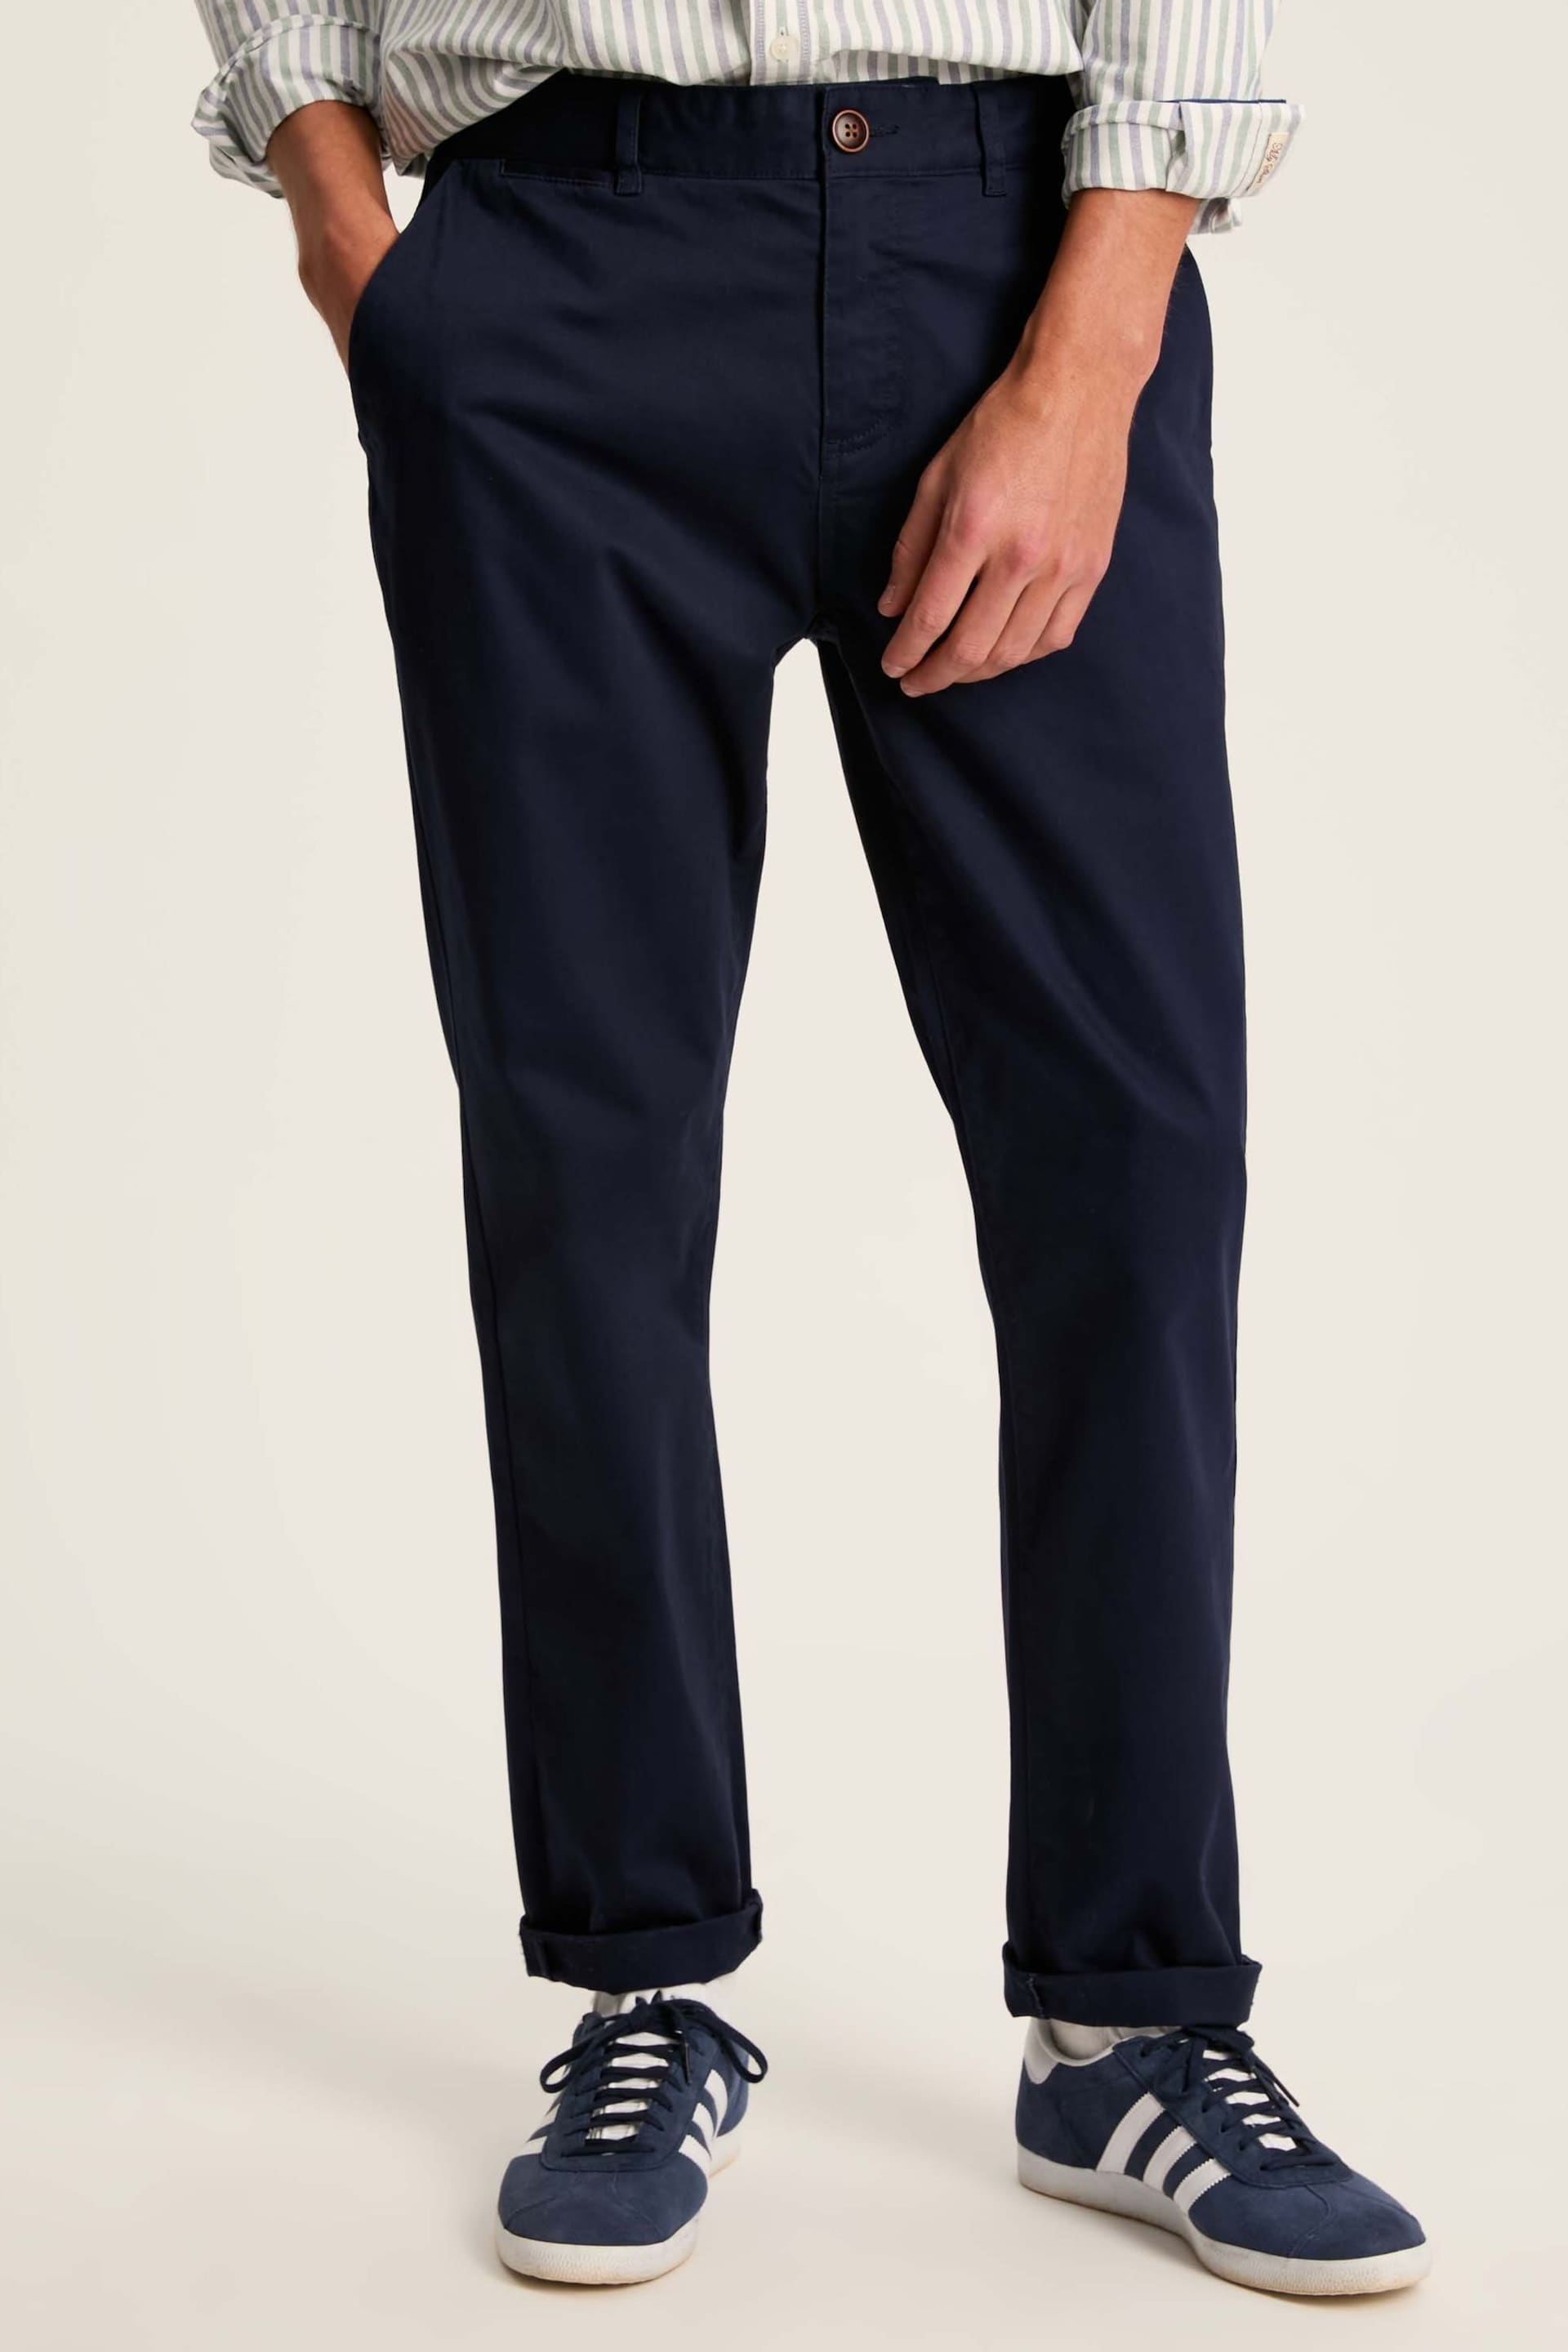 Joules Stamford Navy Blue Slim Fit Chinos - Image 1 of 6